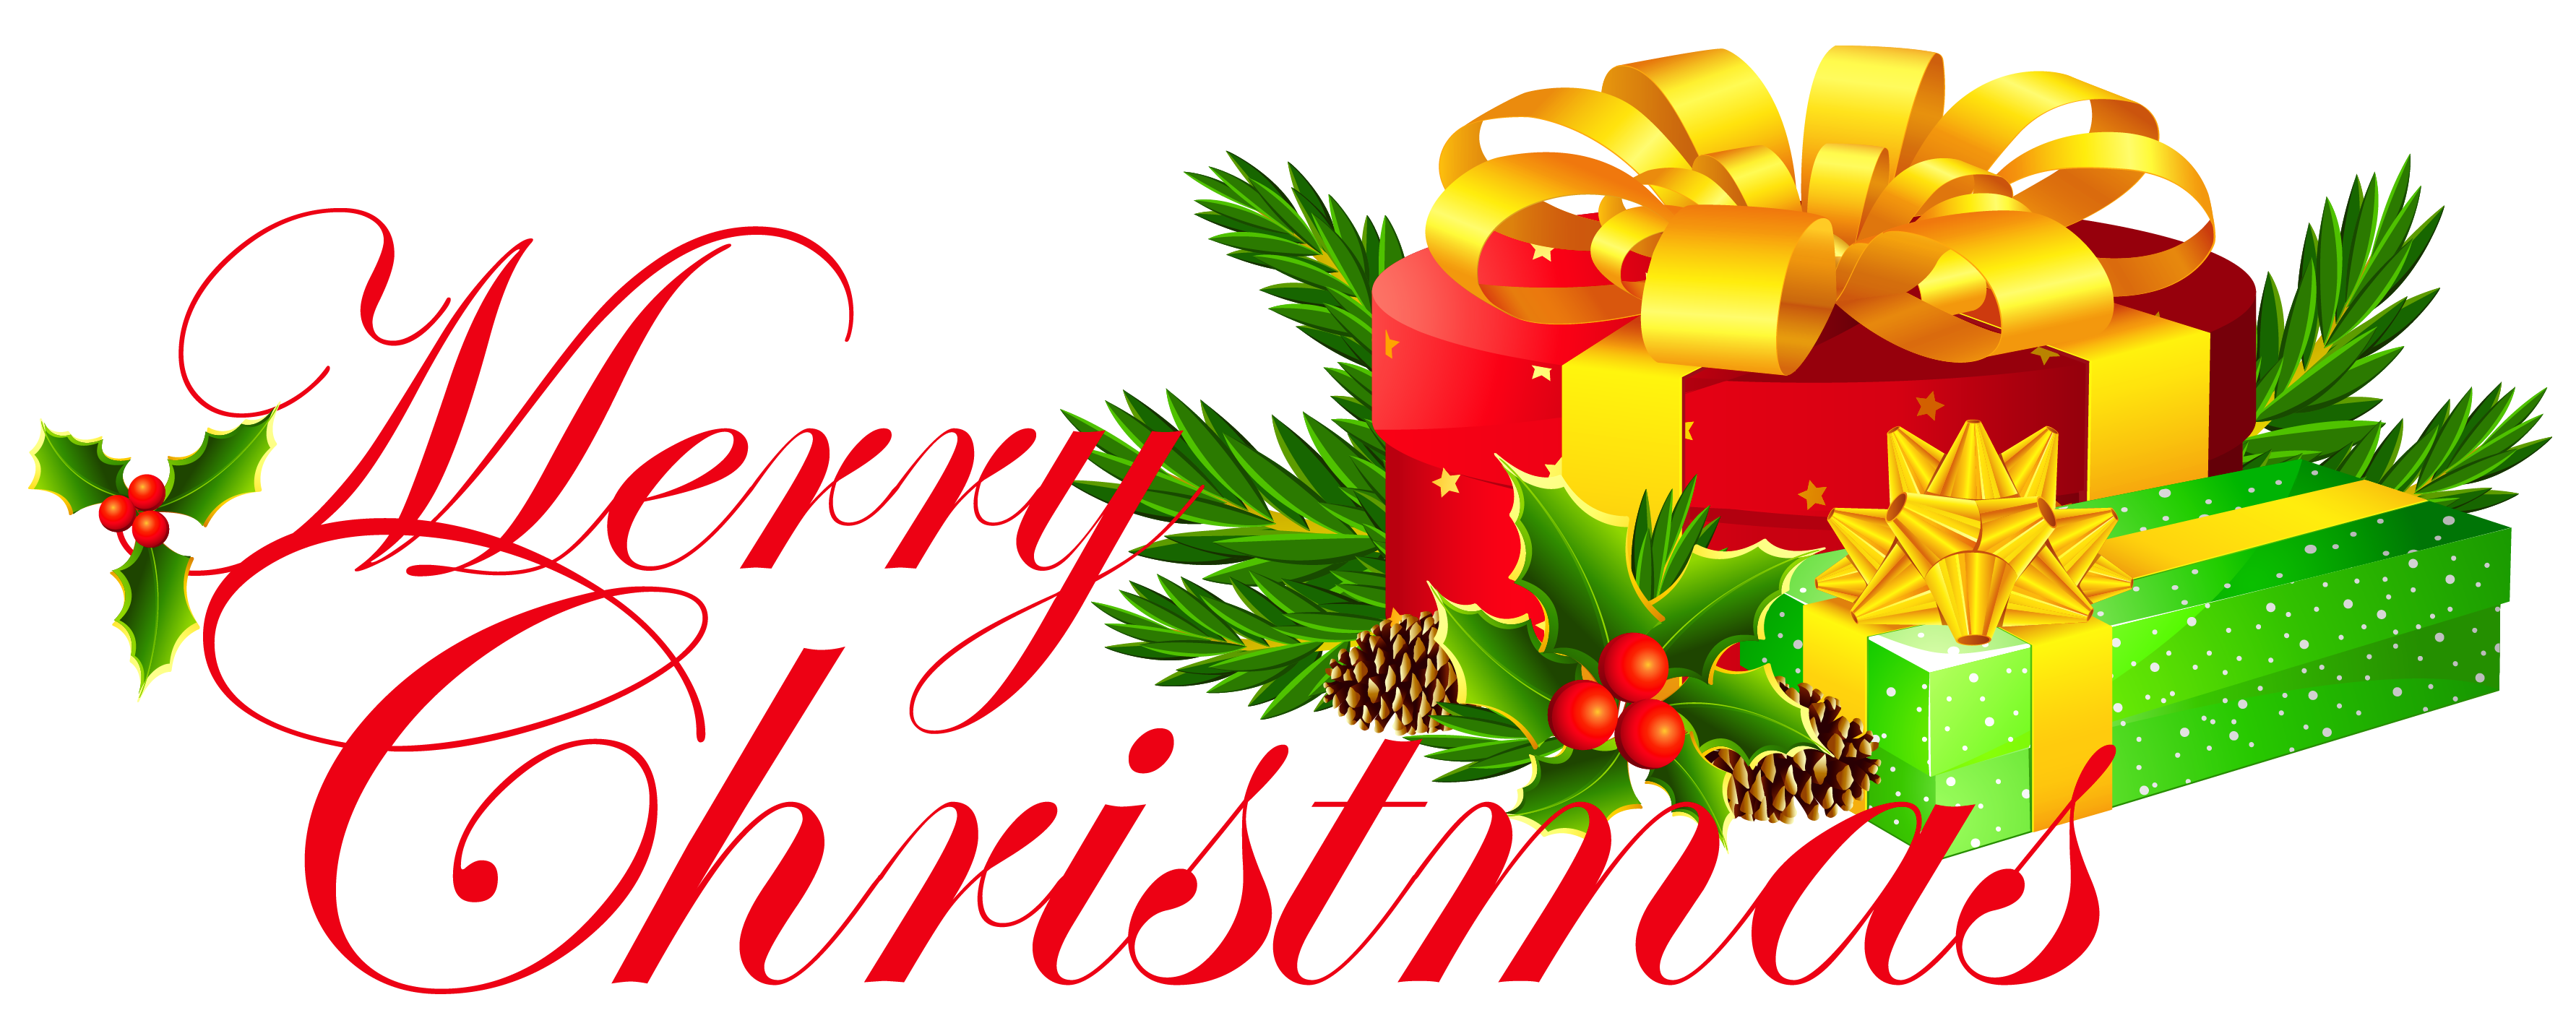 Merry Christmas Clip Art Pictures Hd New Template Images Image Clipartix